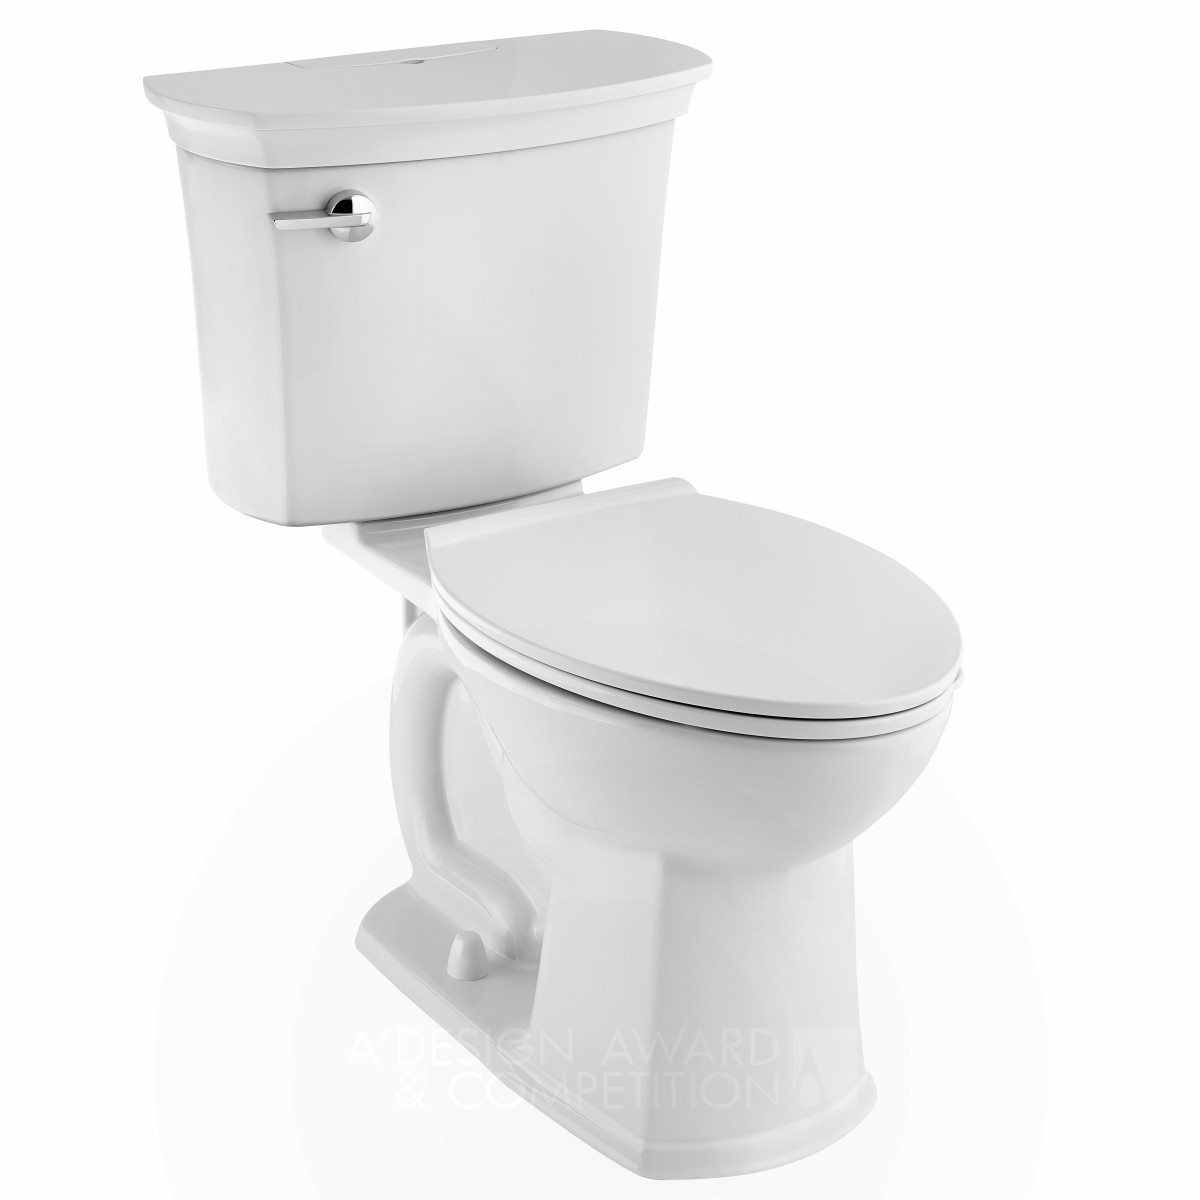 ActiClean Self Cleaning Toilet by American Standard